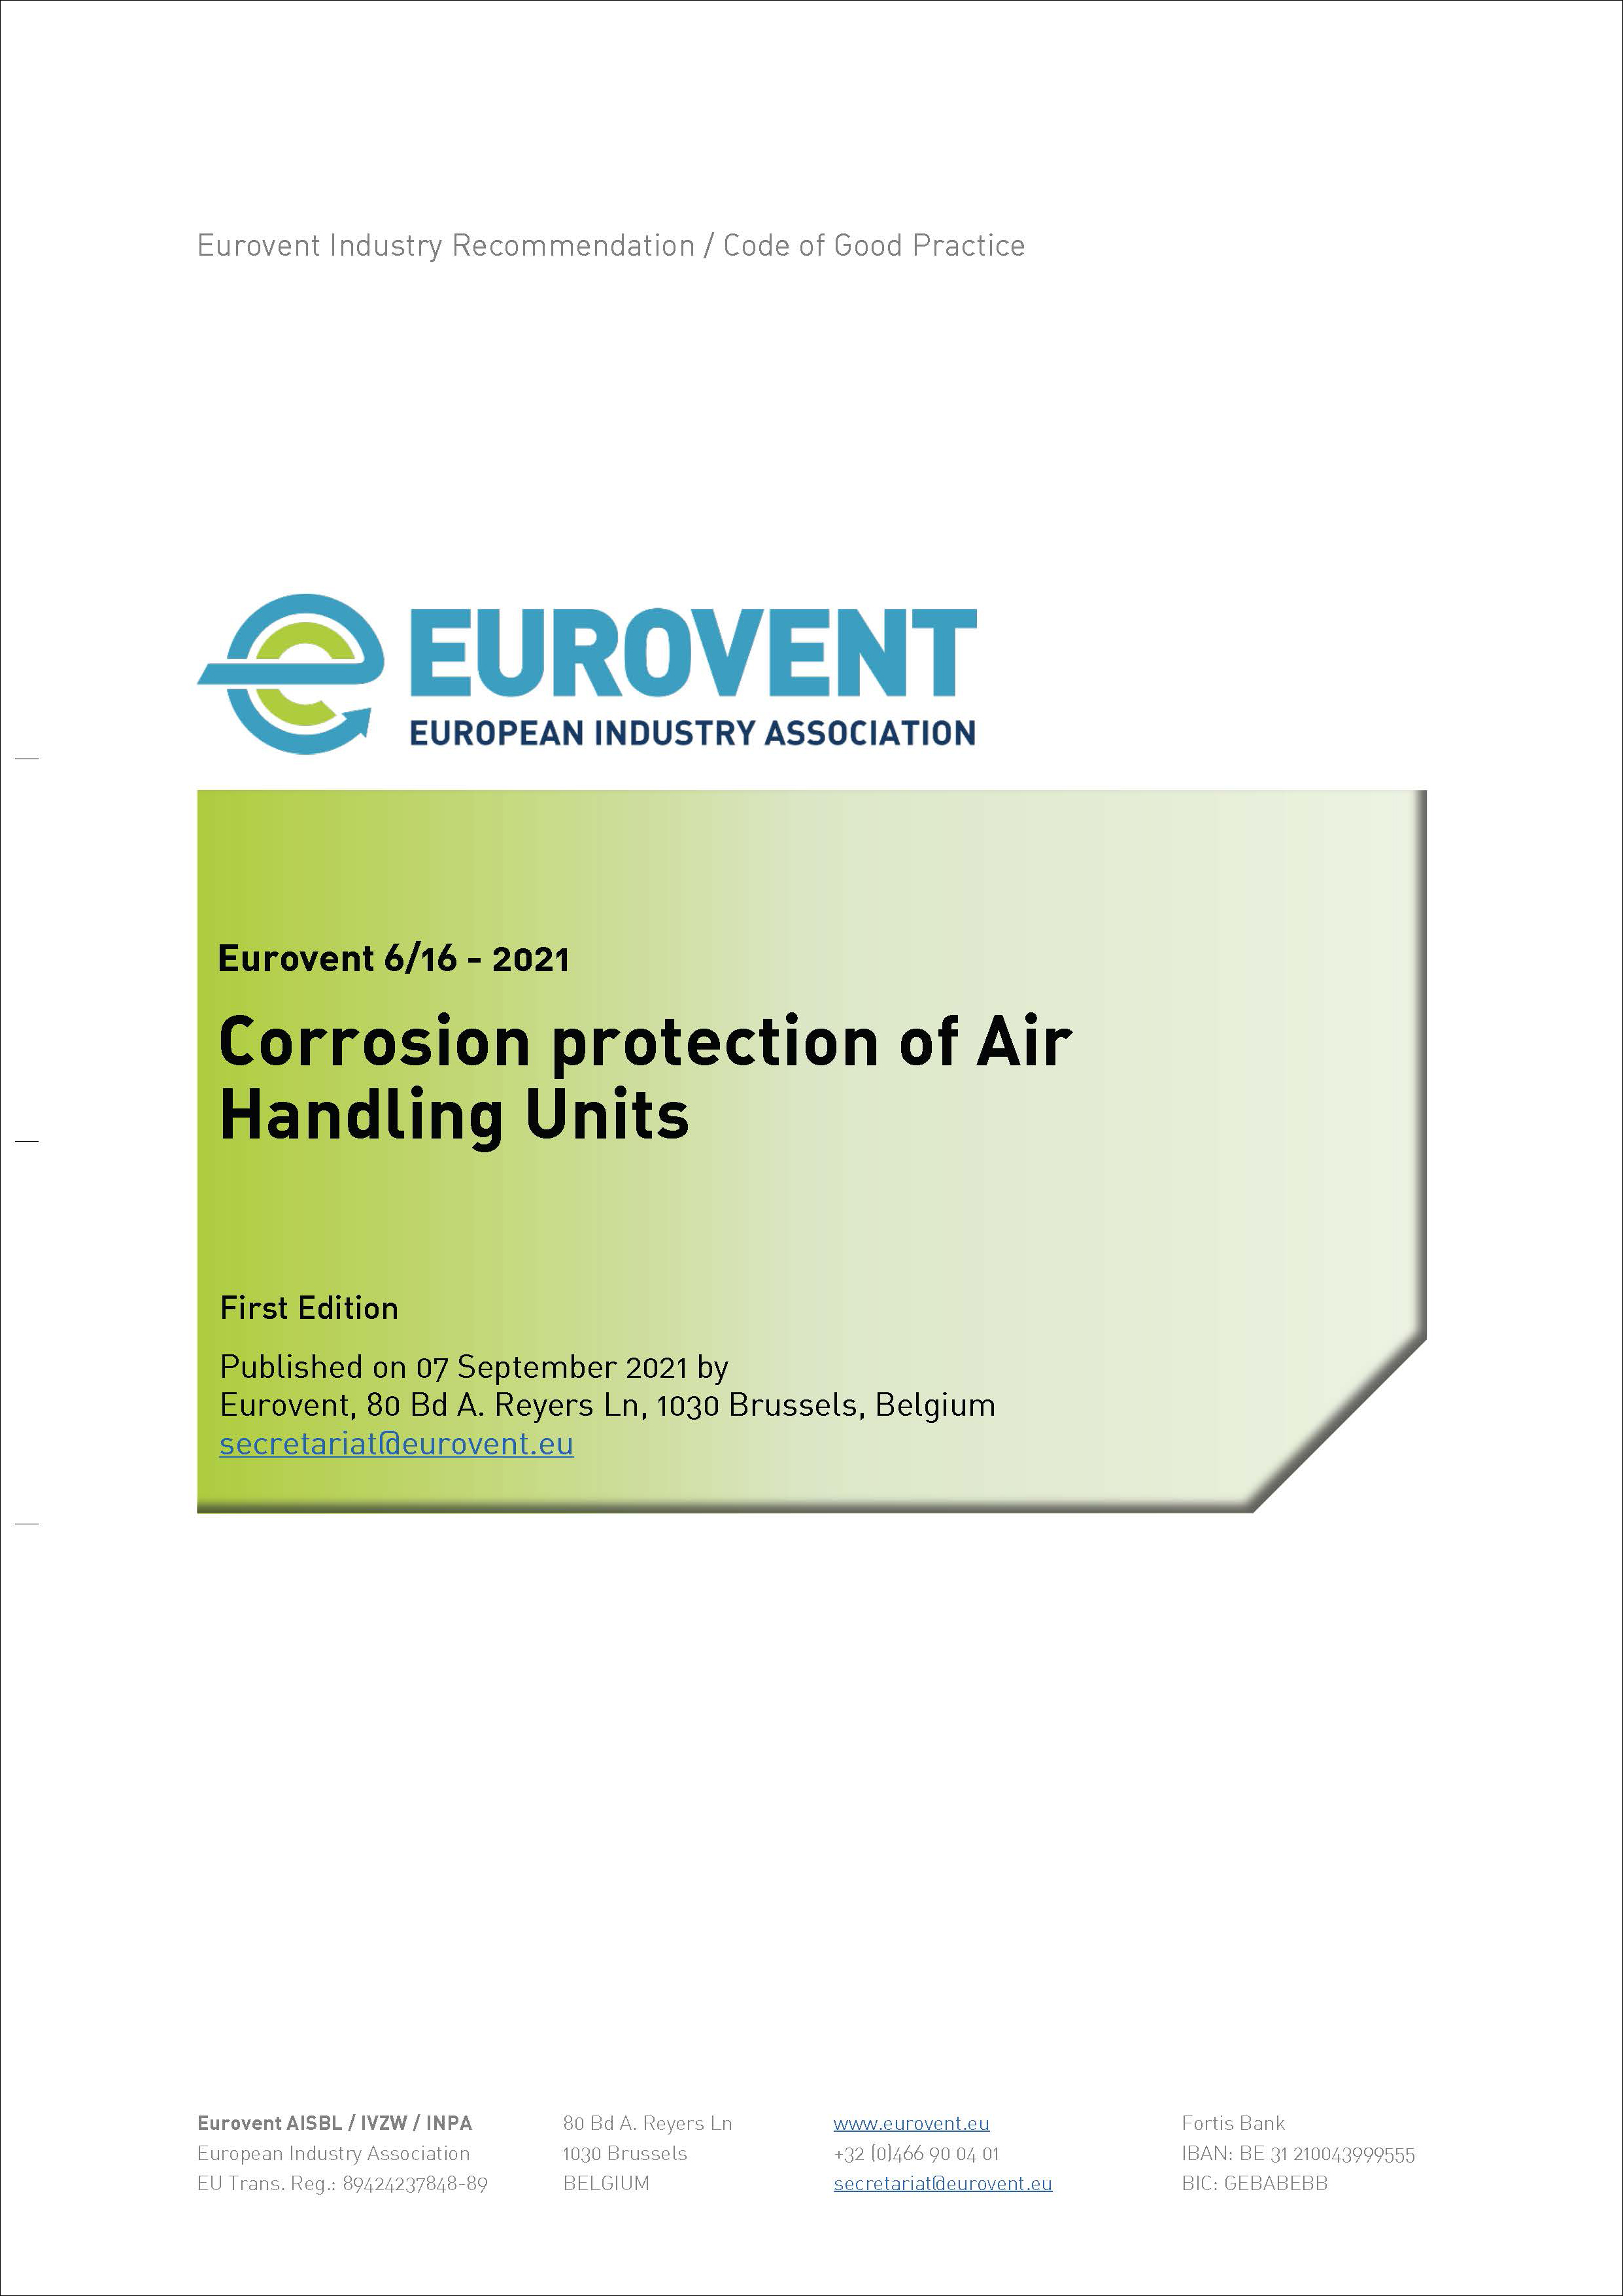 Eurovent 6/16 - 2021: Corrosion Protection of Air Handling Units - First Edition